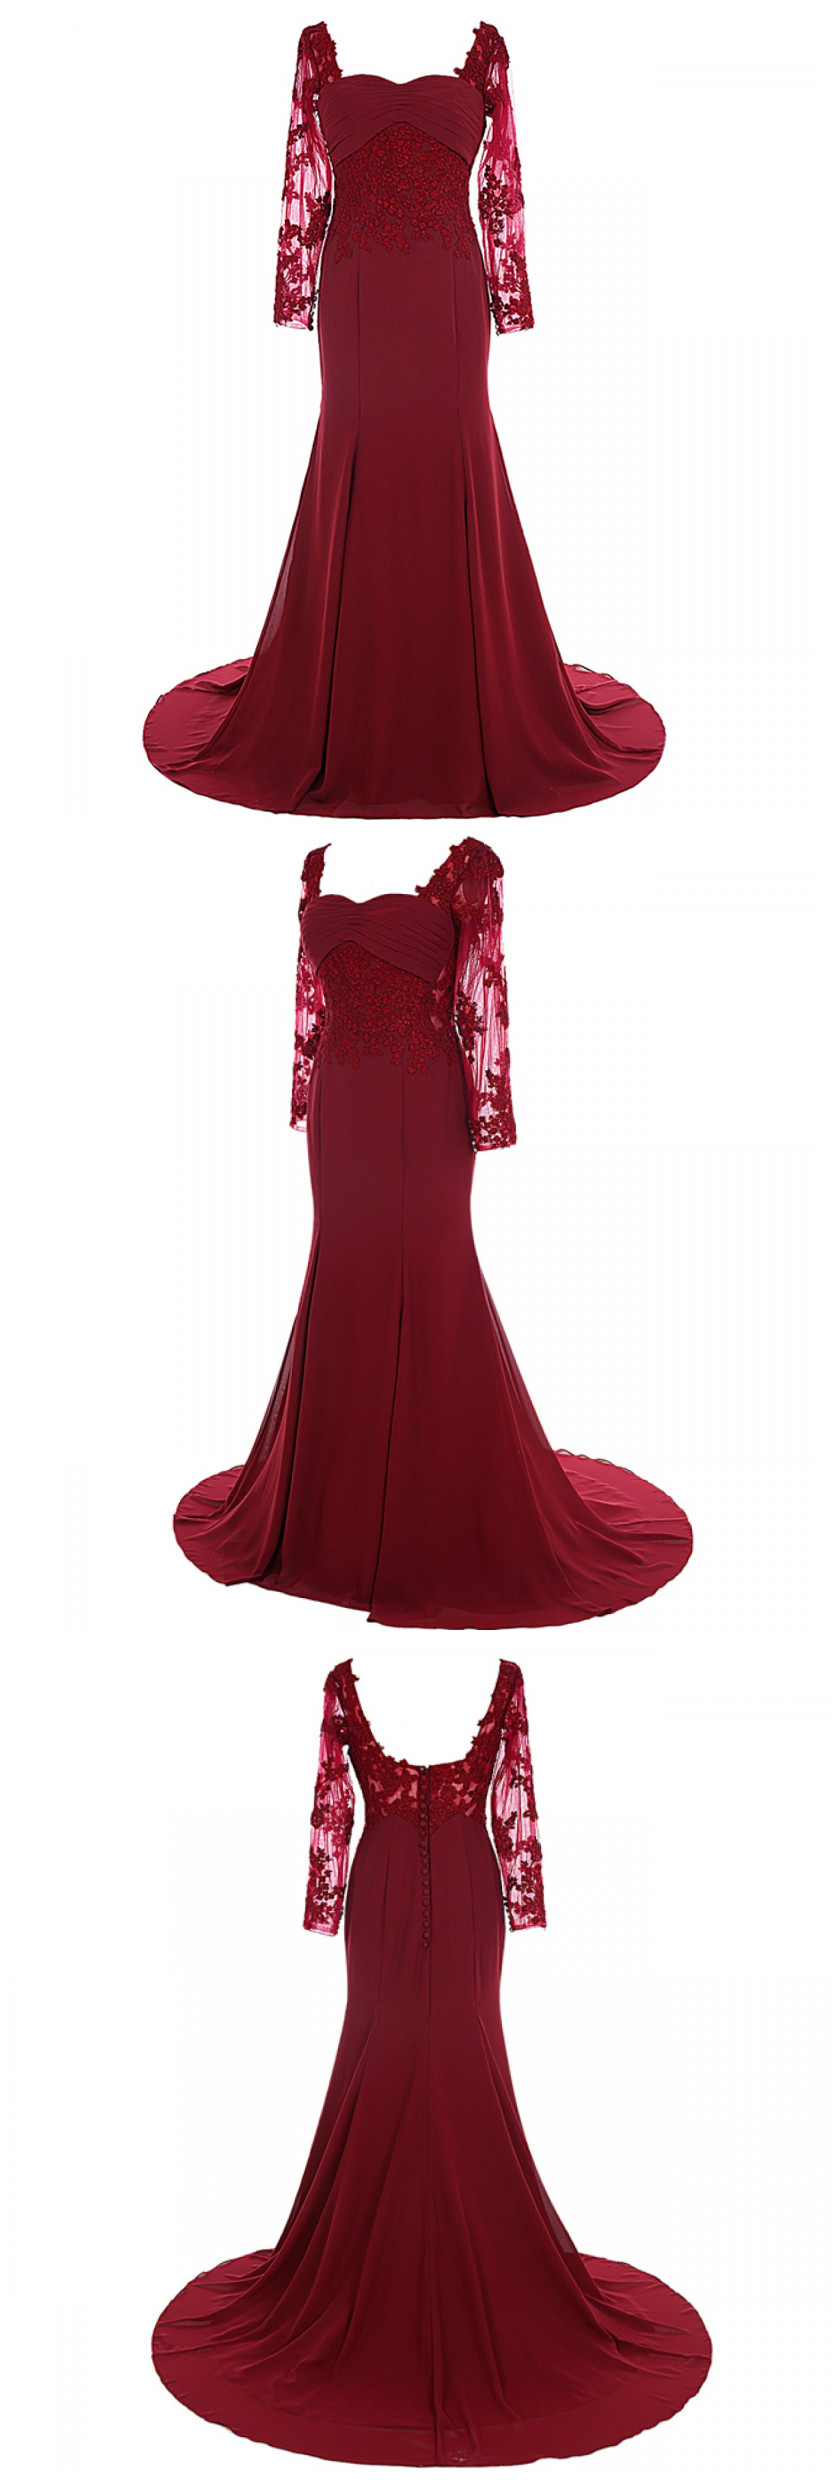 Elegant Mermaid Sweetheart Burgundy Satin Mother Of The Bride Dress With Lace Appliques